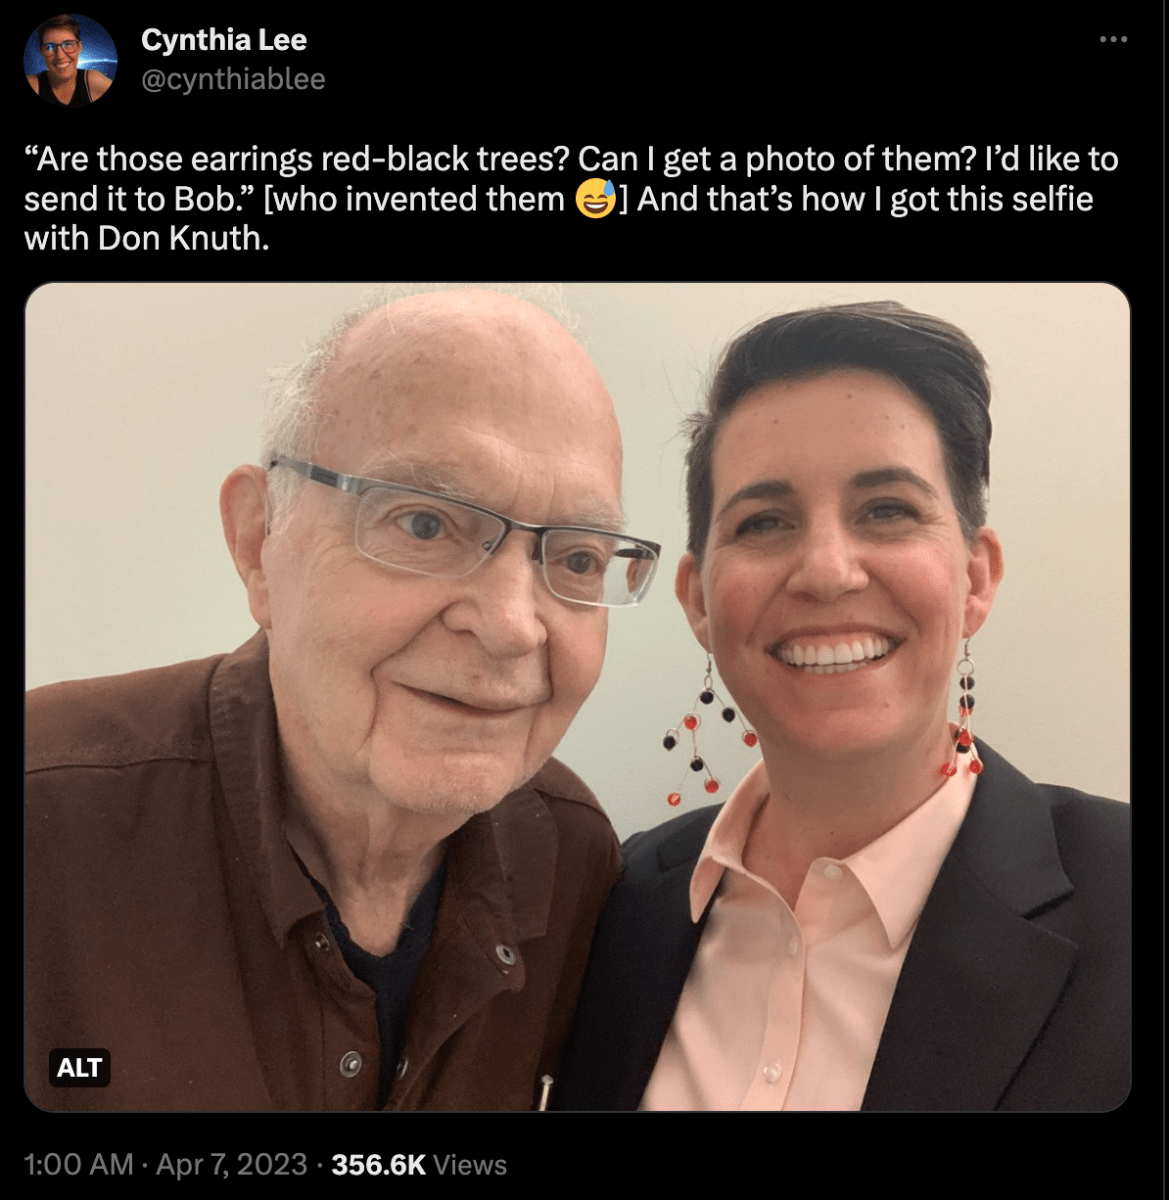 A tweet from Cynthia Lee meeting Donald Knuth. Lee is wearing the red-black tree earrings.